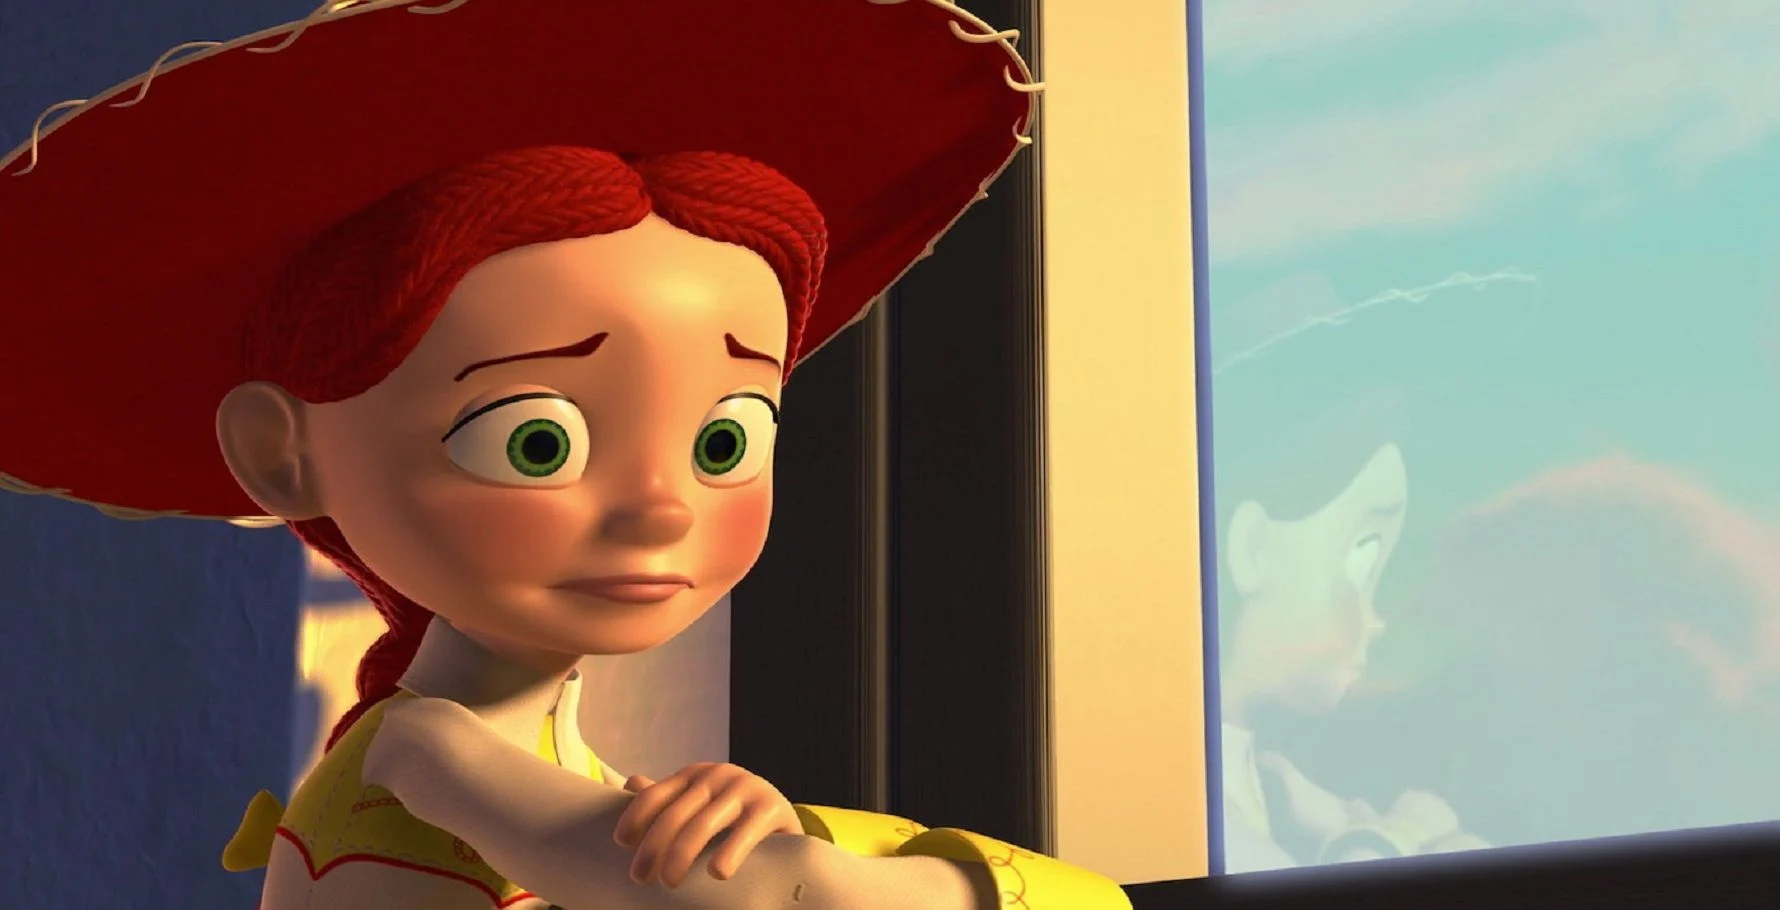 Best toy story characters: Jessie